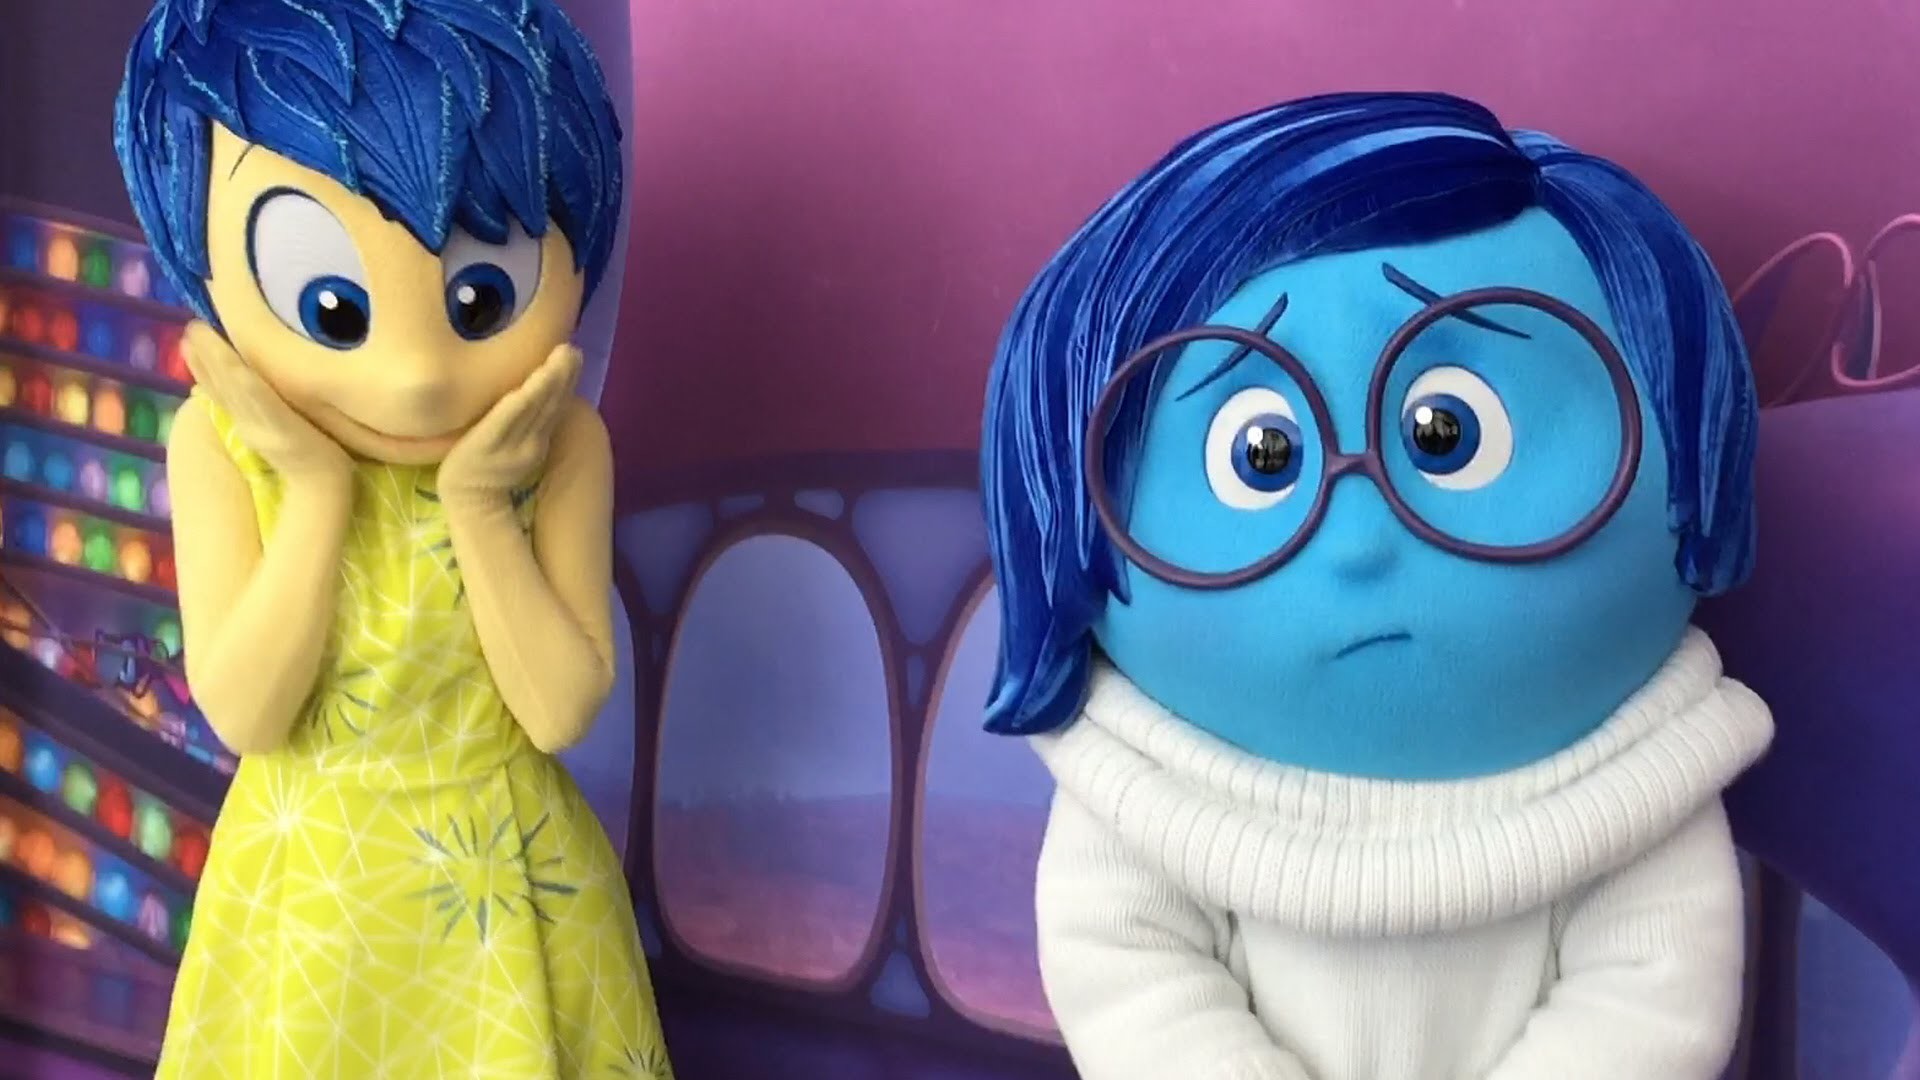 1920x1080 Joy & Sadness Characters From Pixar Inside Out Meet Us During Special Event  at Walt Disney World - YouTube